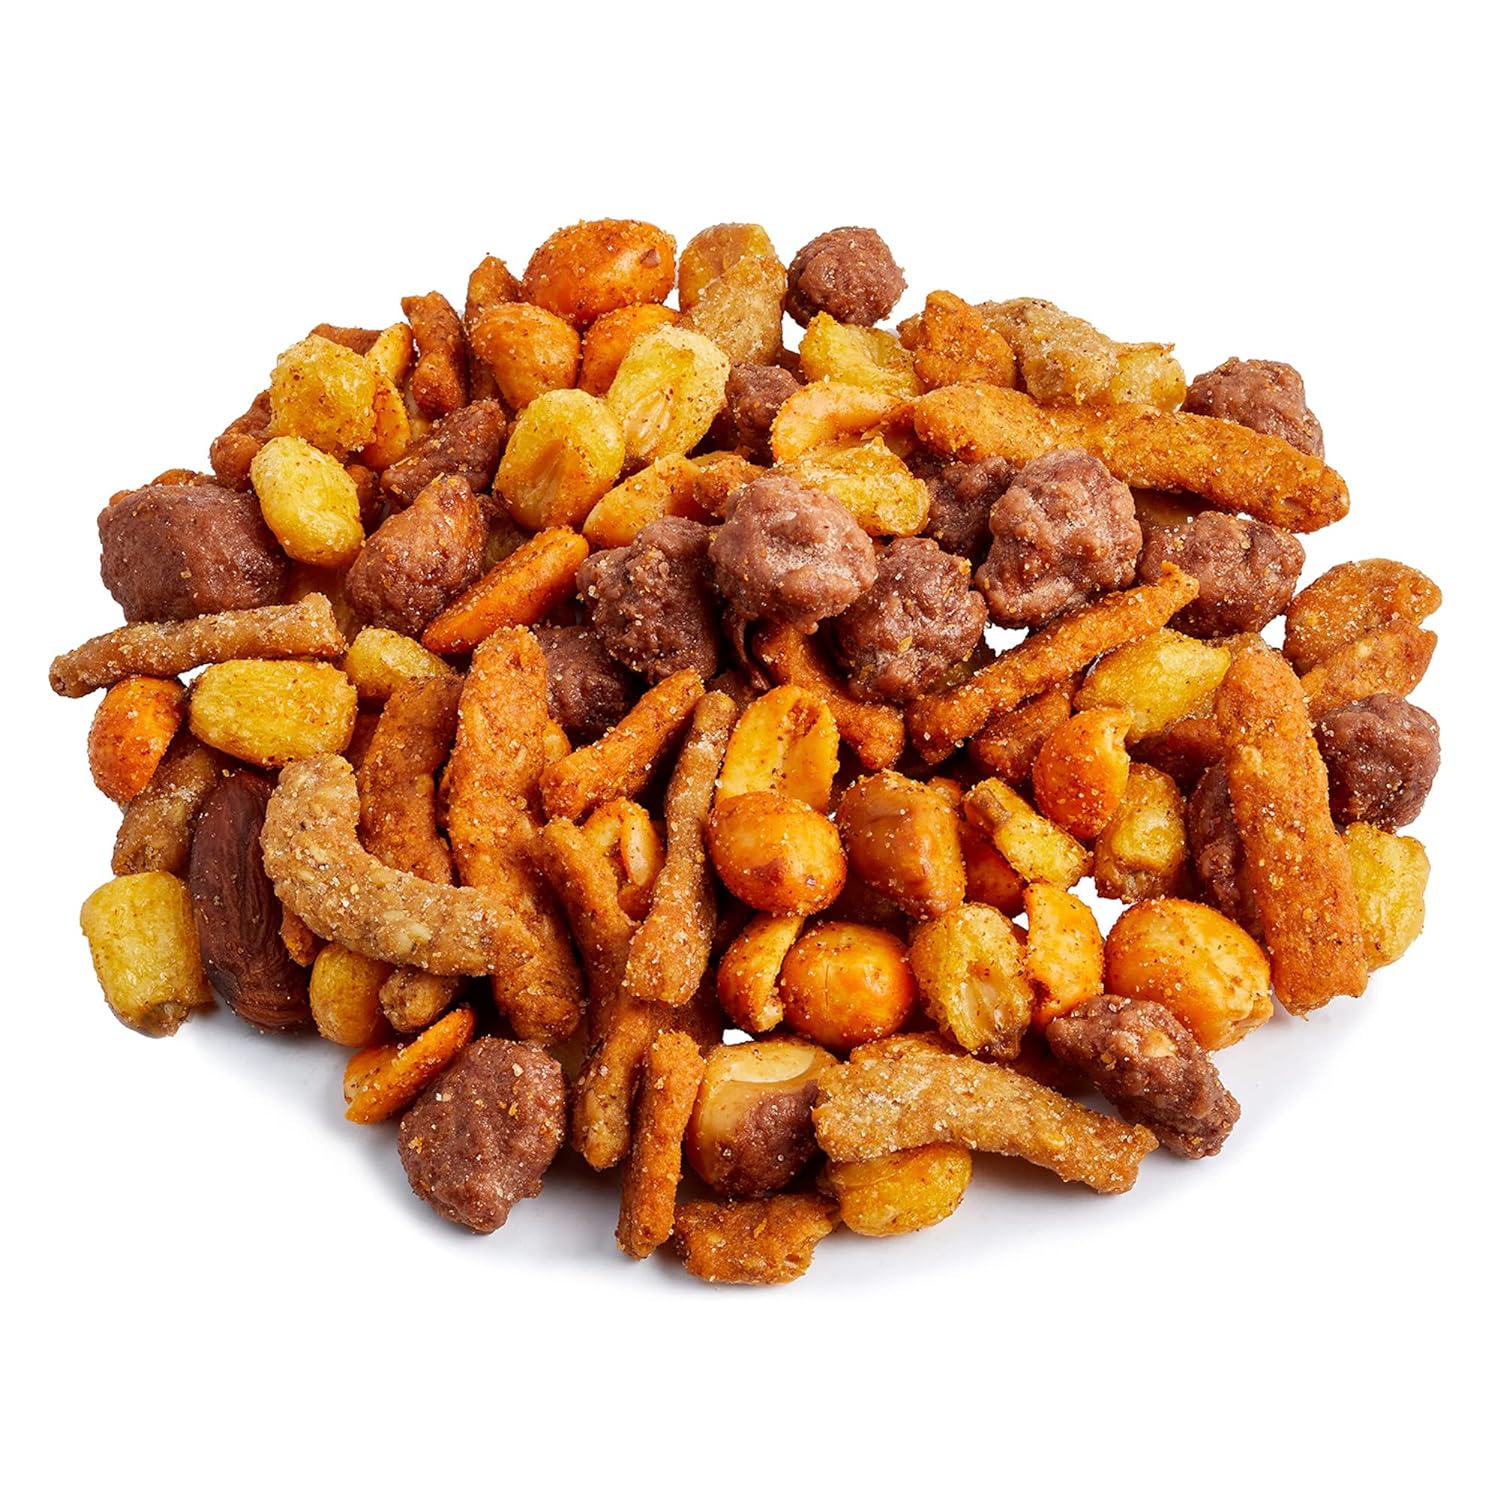 Amazon Fresh - Sweet & Spicy Trail Mix, 16 oz (Pack of 2) (Previously Happy Belly, Packaging May Vary)